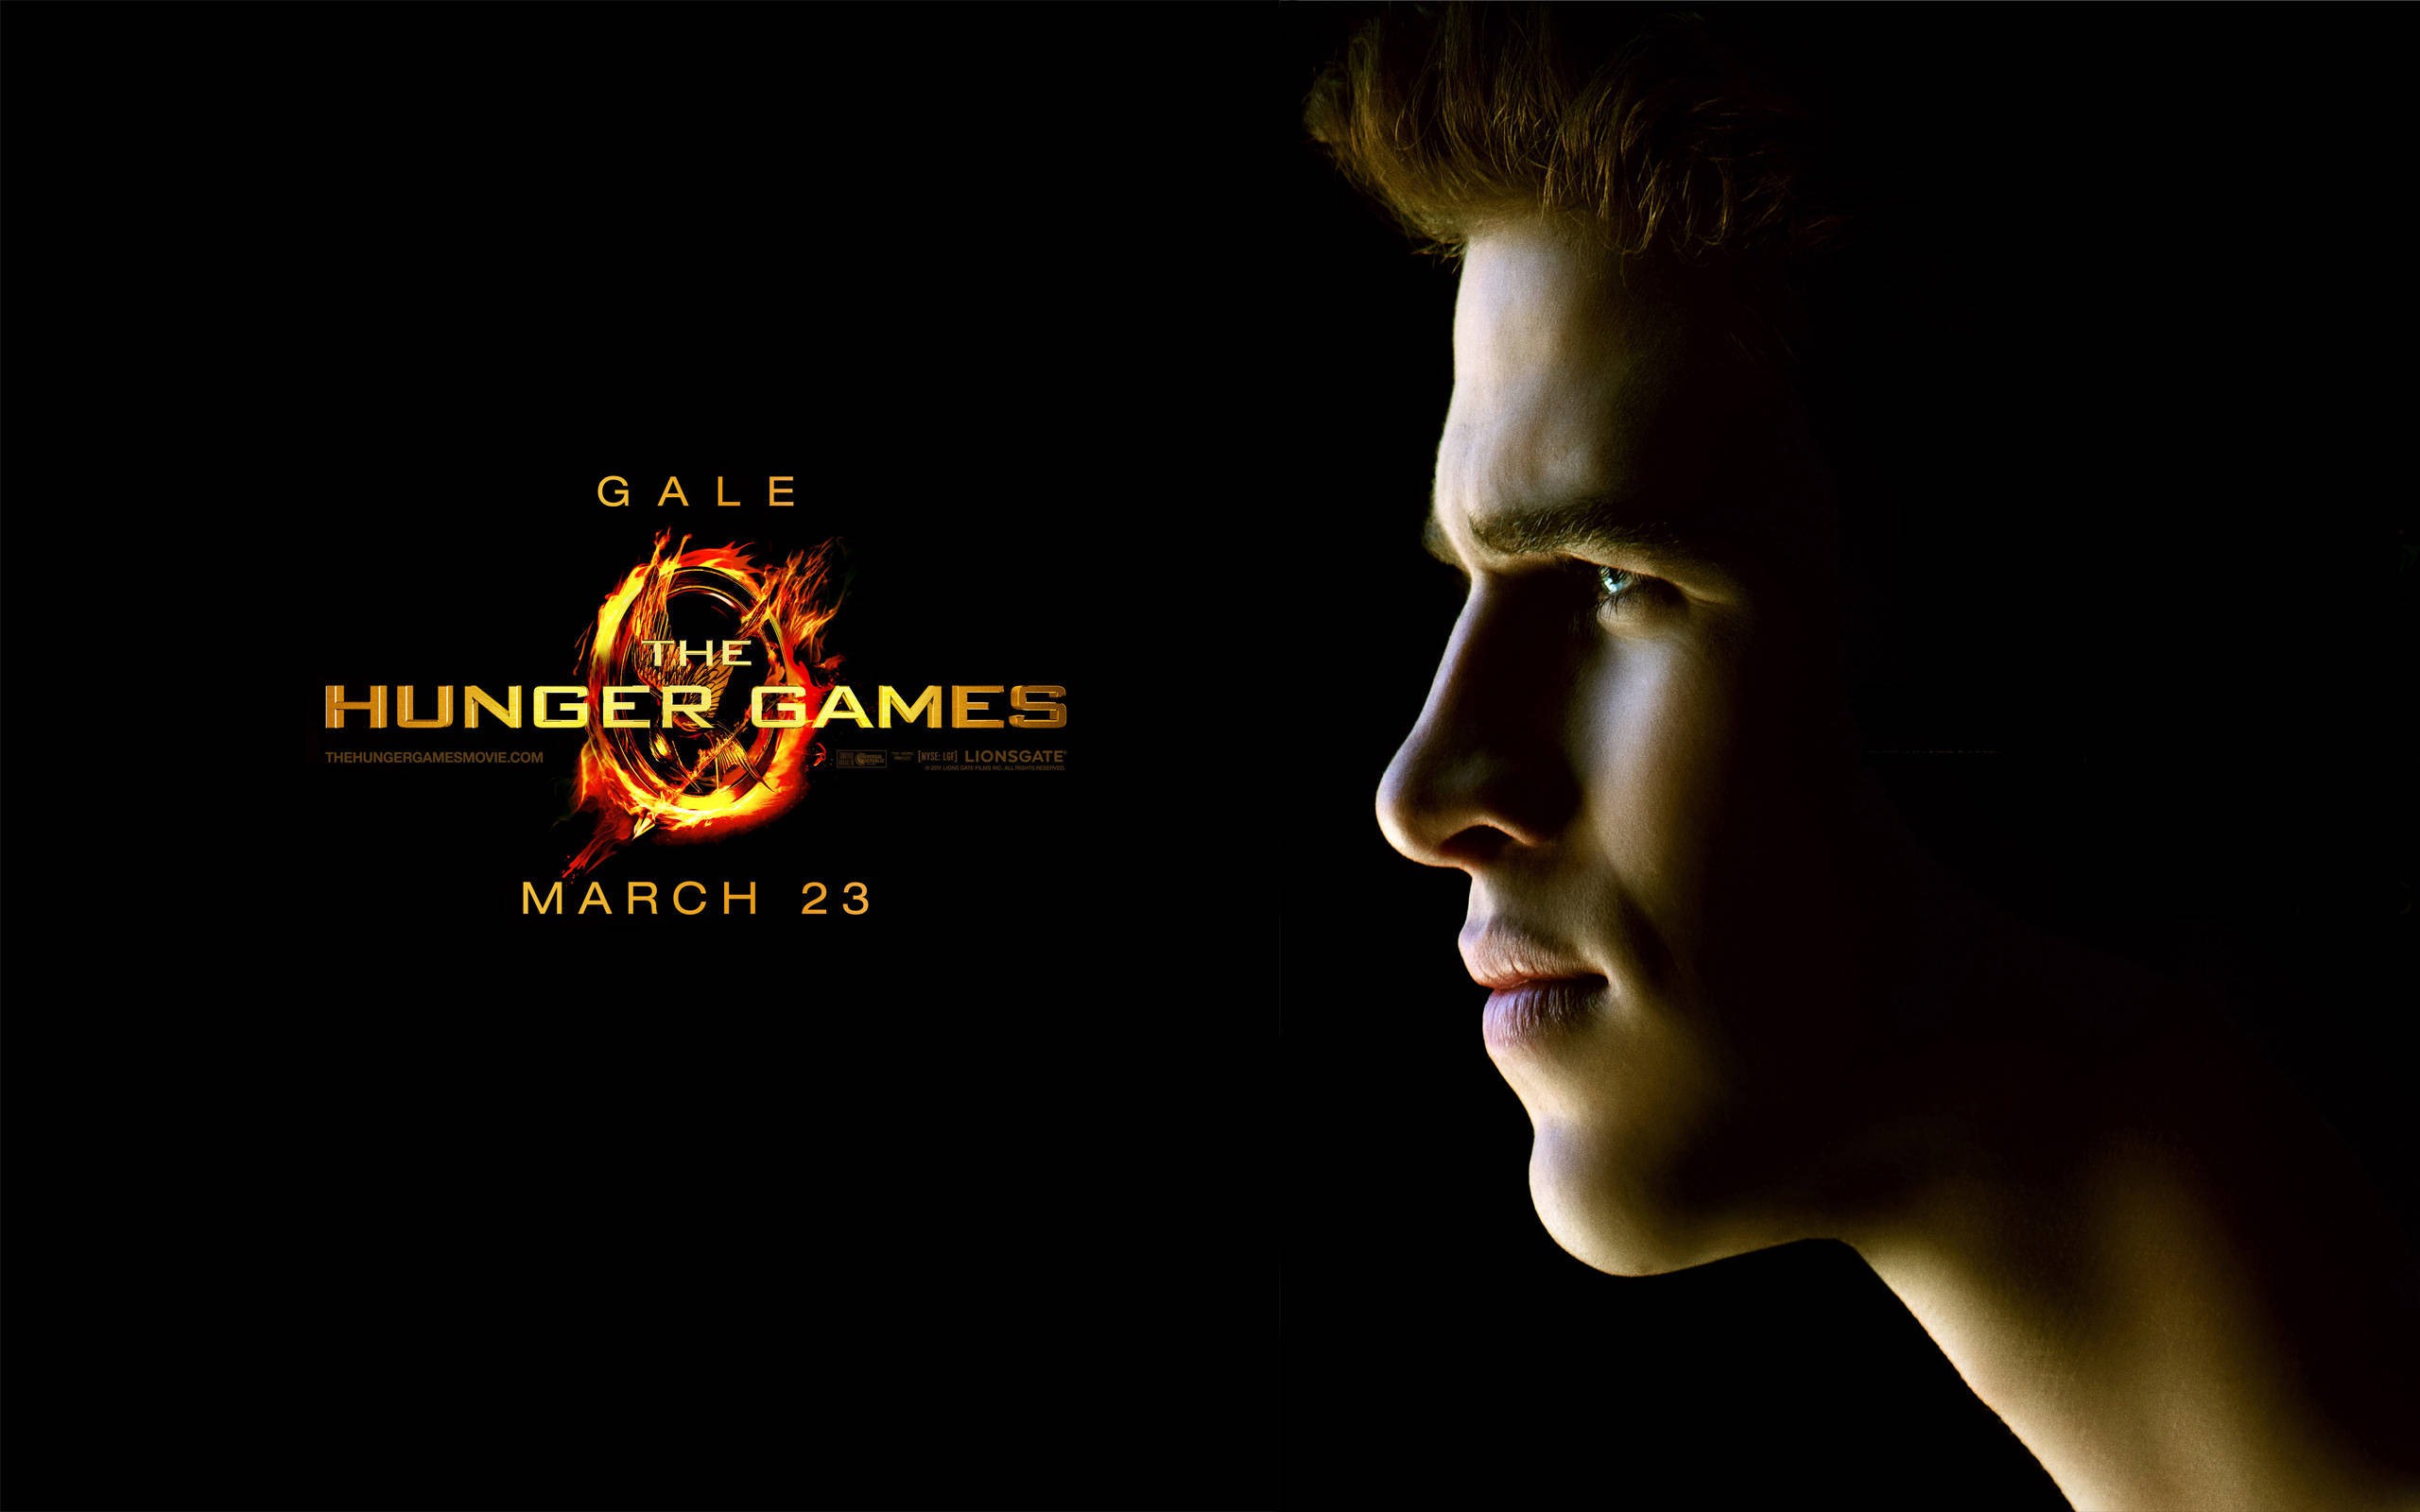 The Hunger Games HD wallpapers #4 - 2560x1600